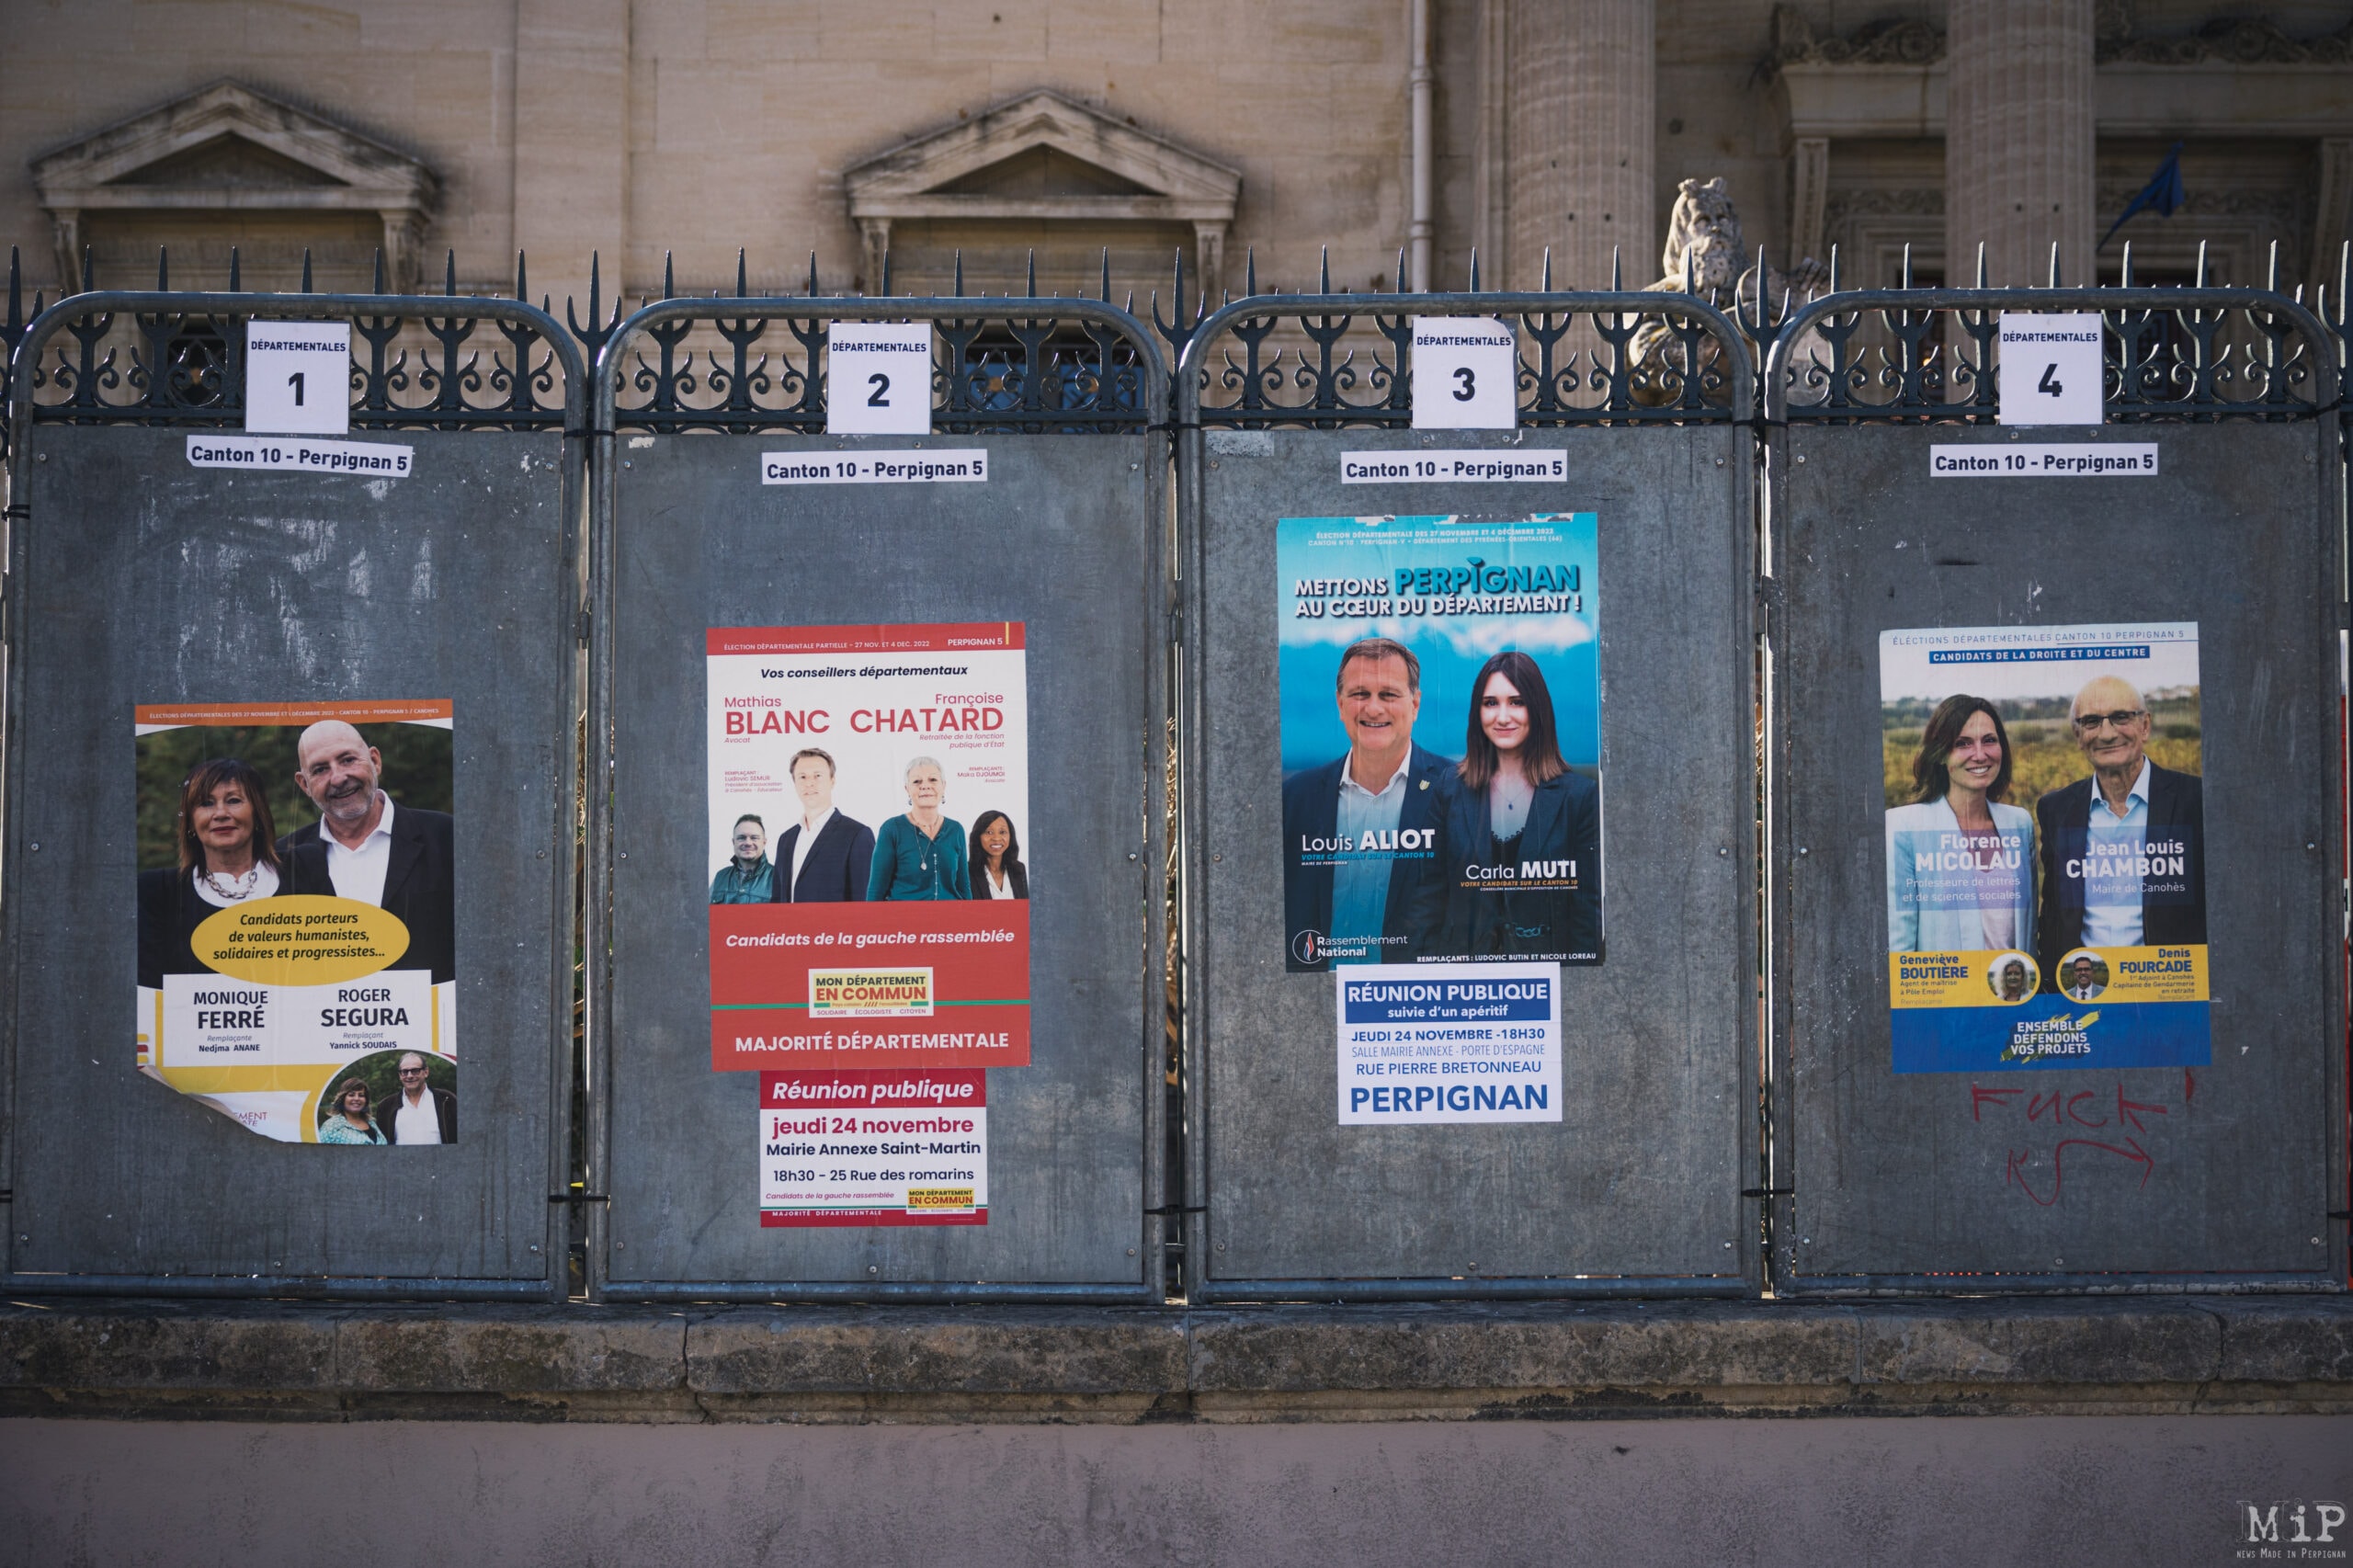 ELECTIONS DEPARTEMENTALES CANTION 10